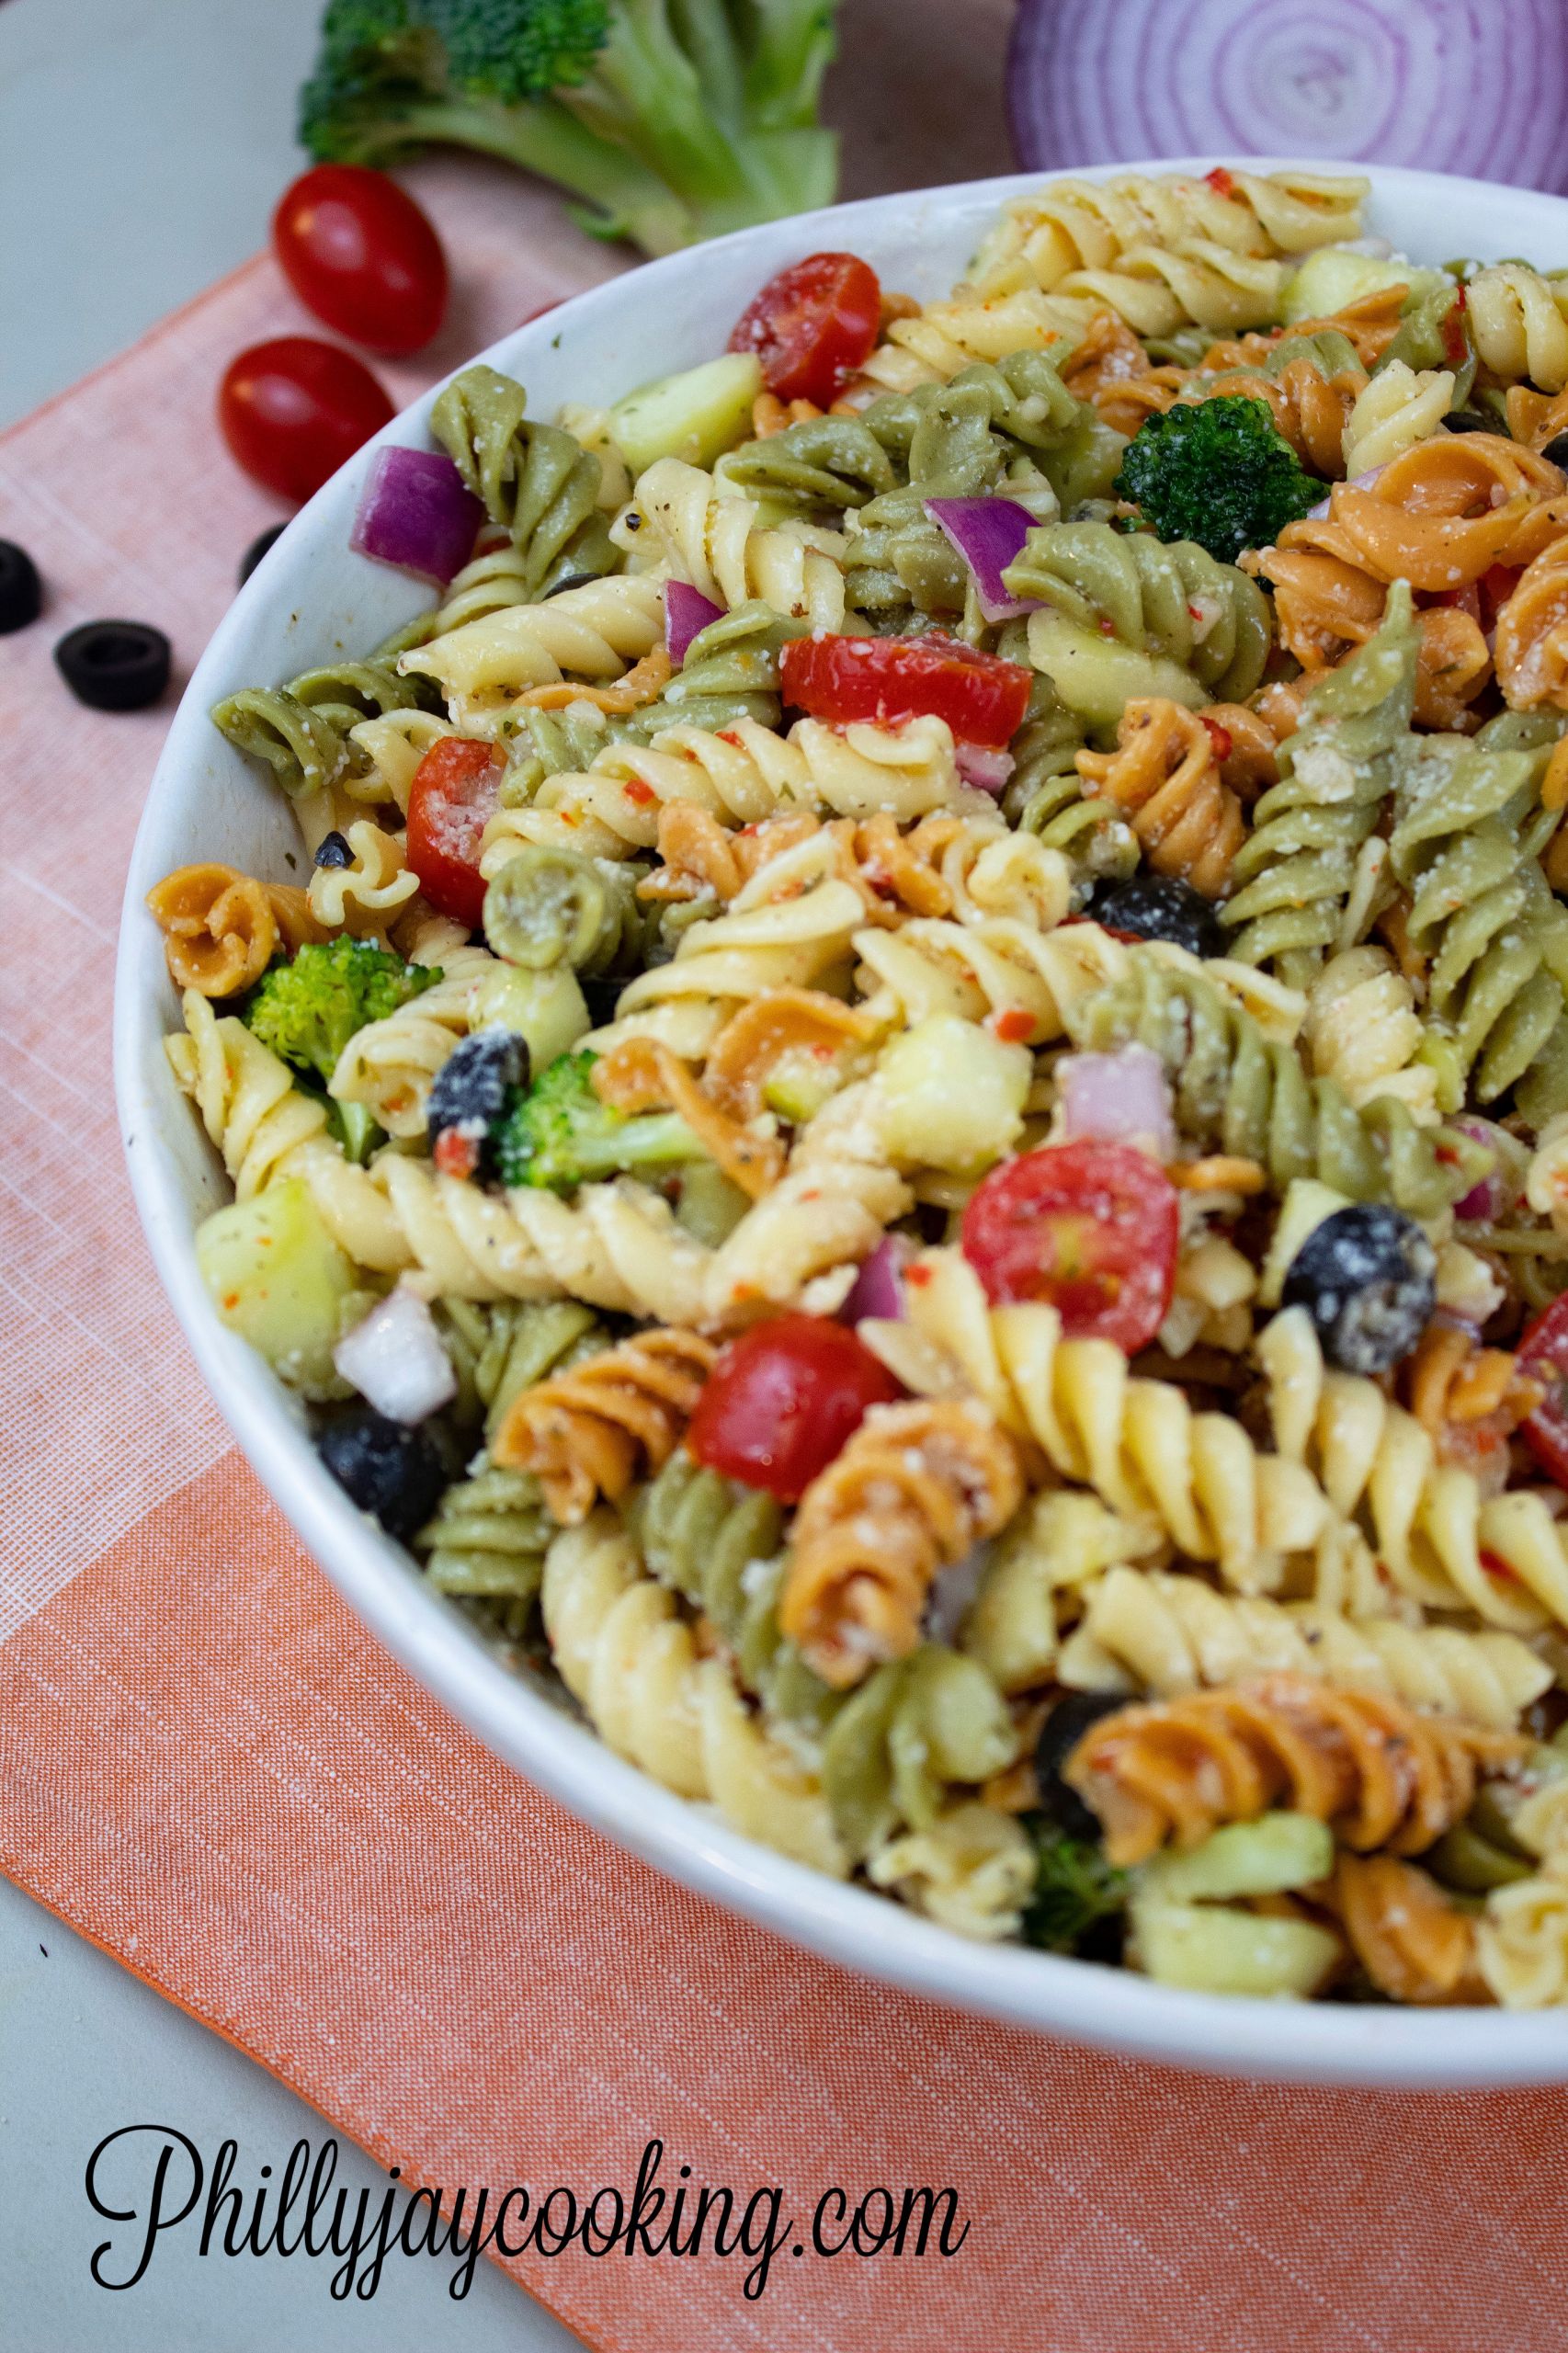 Pasta Salad With Italian Dressing And Cucumbers
 The Best Ever Italian Dressing Pasta Salad Recipe – Philly